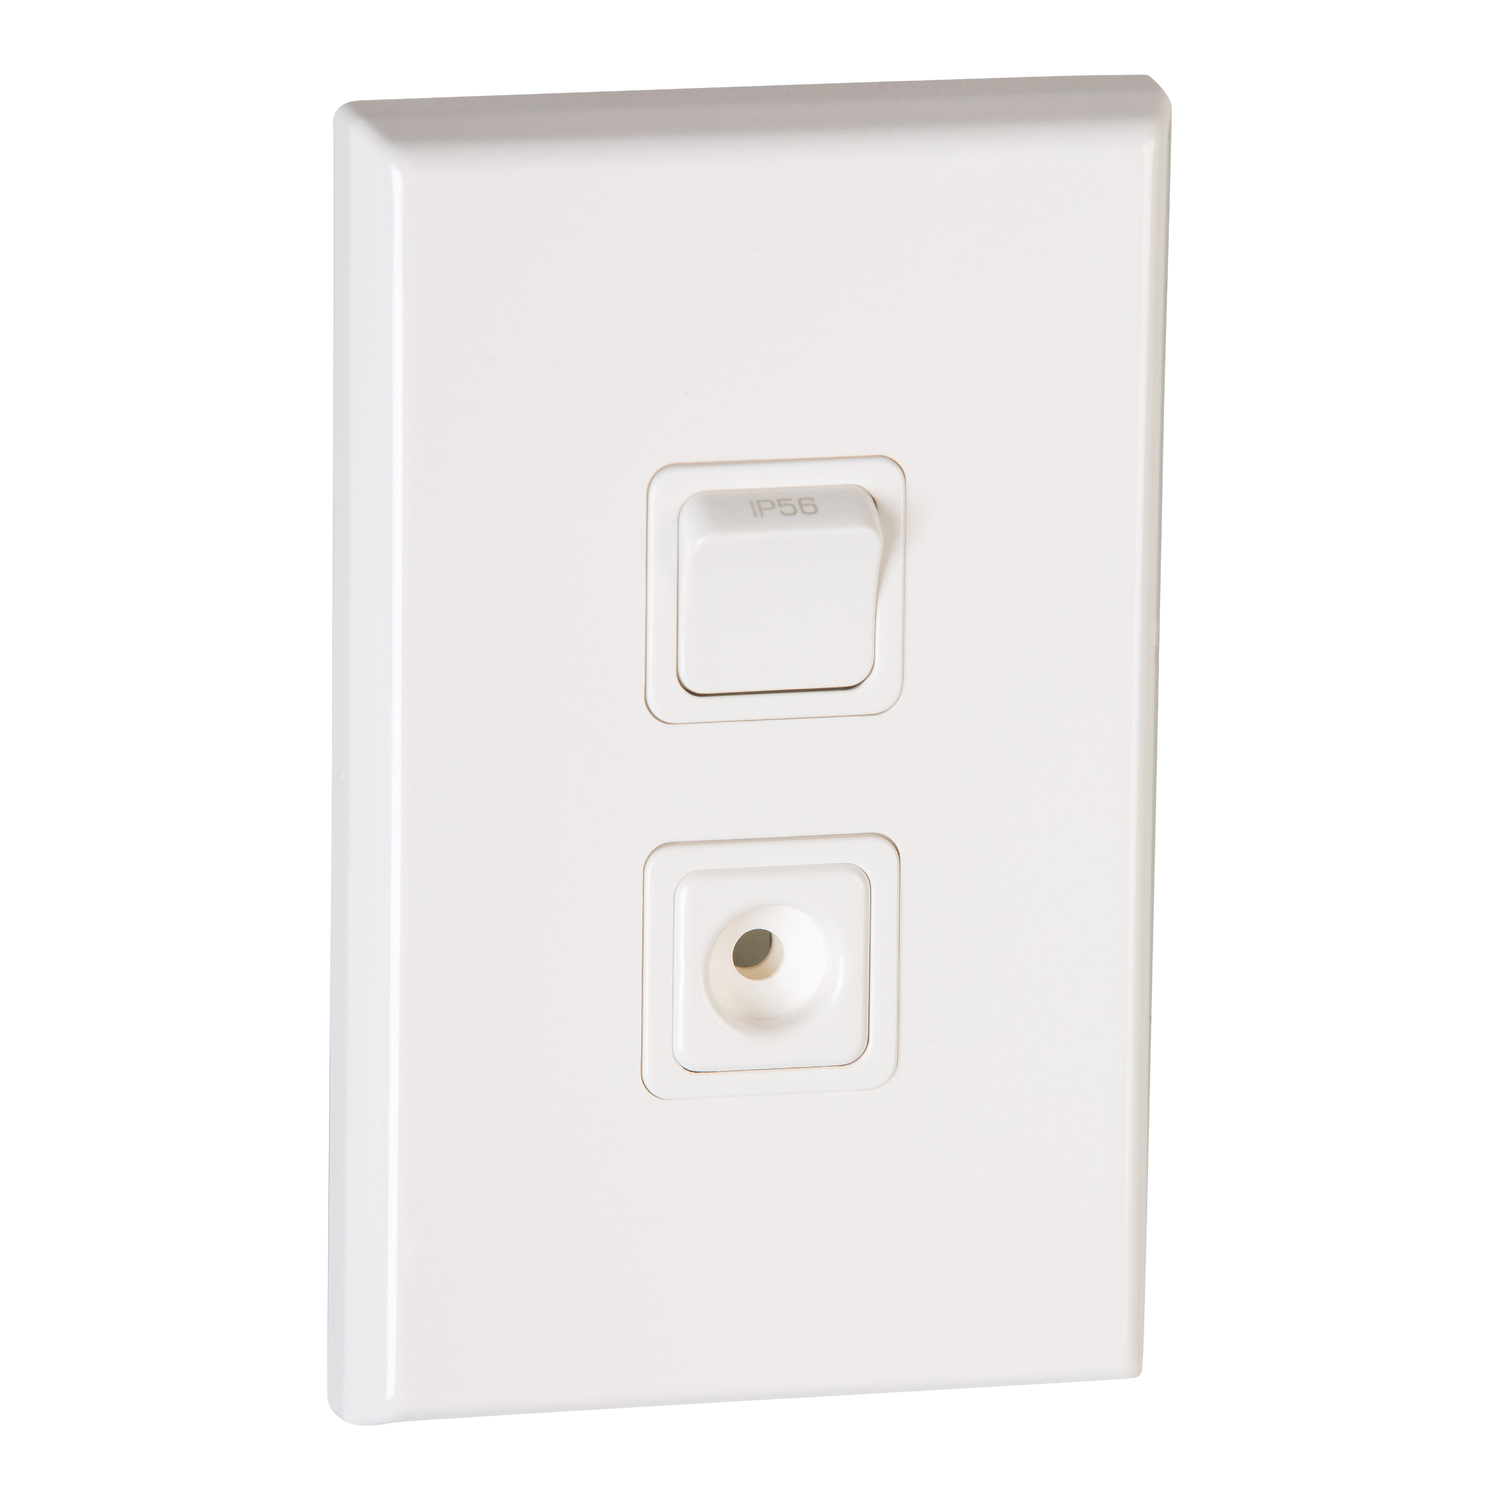 PDL 600 Series - Waterproof Permanent Connection Unit 16A IP56 - White